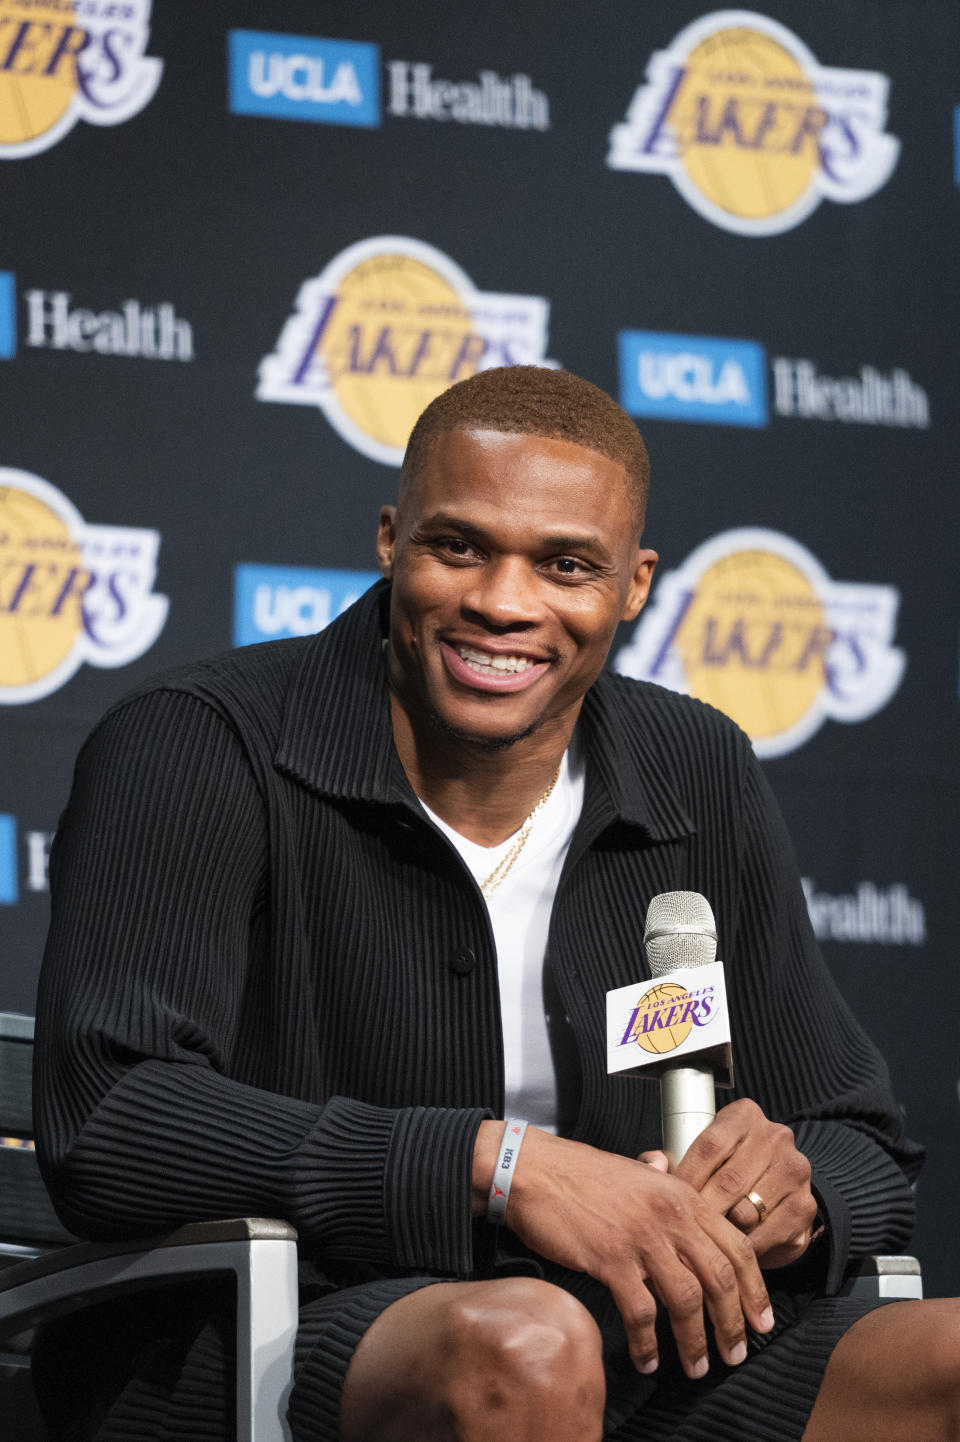 Los Angeles Lakers guard Russell Westbrook smiles during an introductory NBA basketball news conference in Los Angeles, Tuesday, Aug. 10, 2021. (AP Photo/Kyusung Gong)